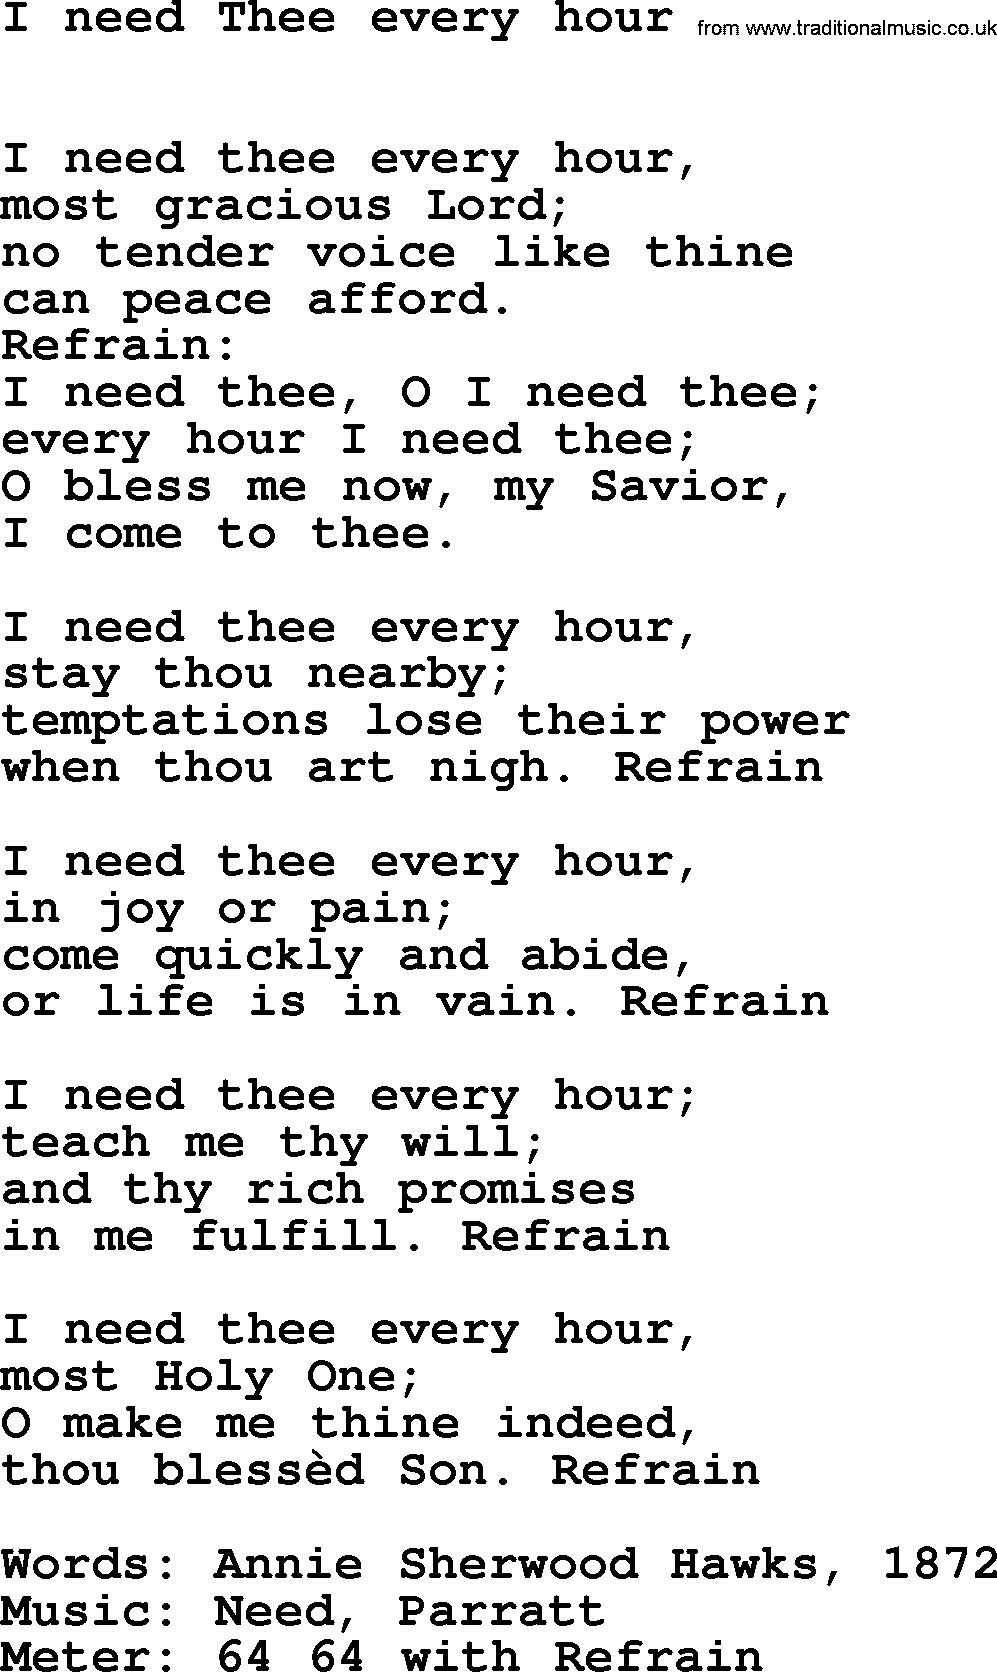 Book of Common Praise Hymn: I Need Thee Every Hour.txt lyrics with midi music